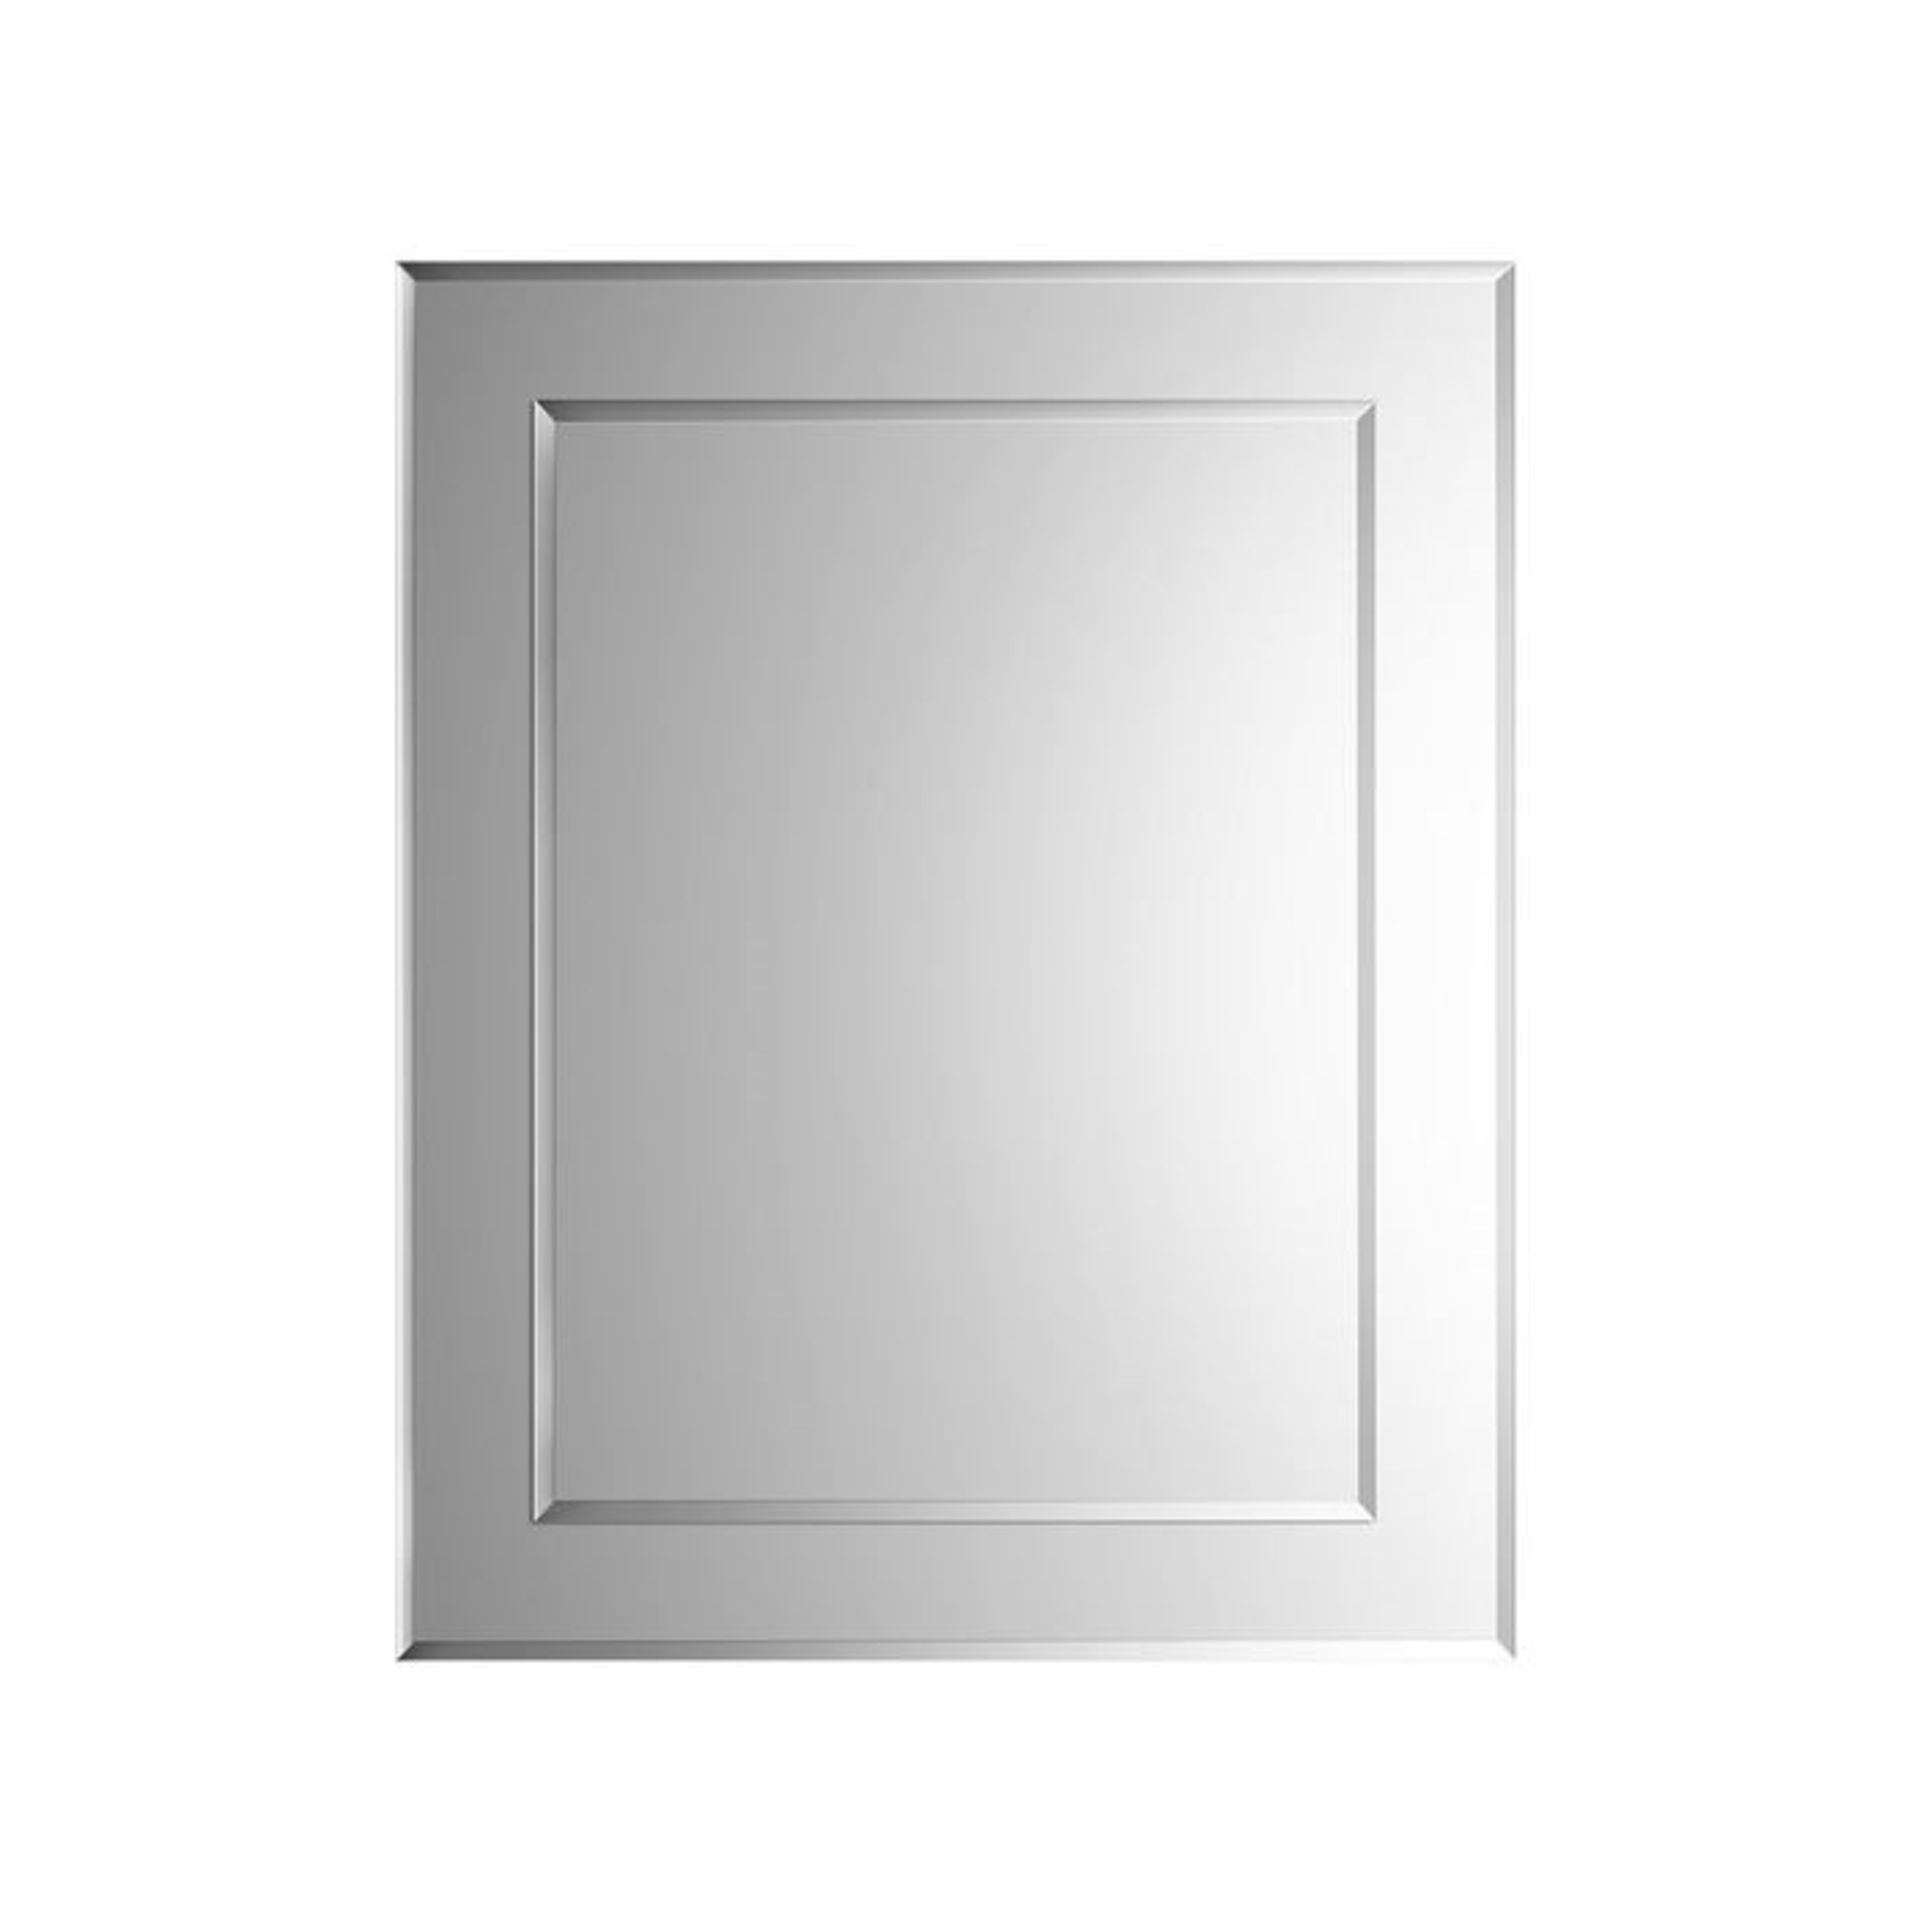 400x500mm Bevel Mirror. Smooth beveled edge for additional safety Supplied fully assembled for ... - Image 2 of 2